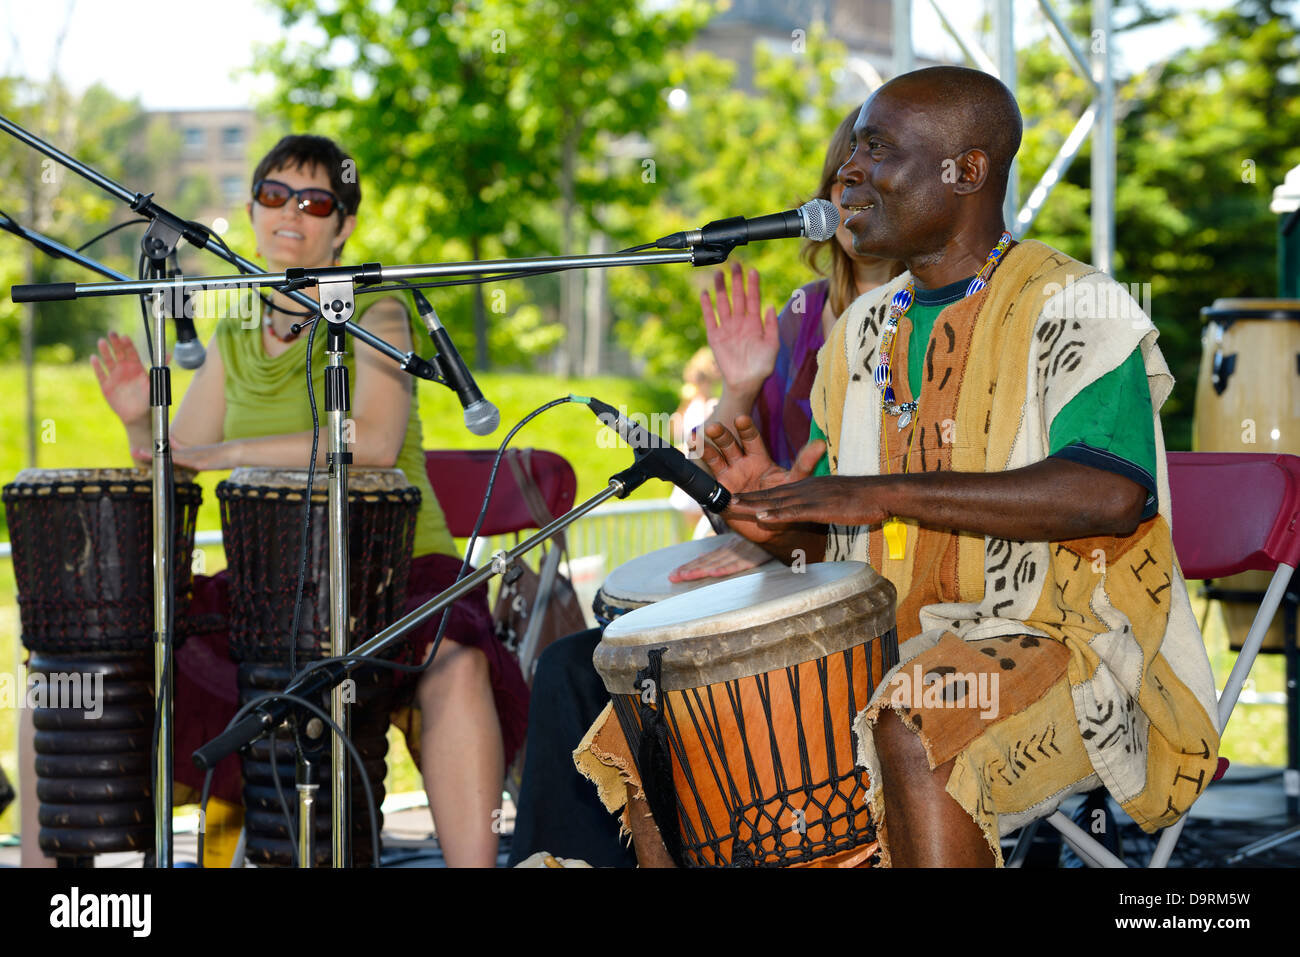 Njacko Backo group of African djembe drummers performing on stage at the Muhtadi Drum Festival Toronto Stock Photo